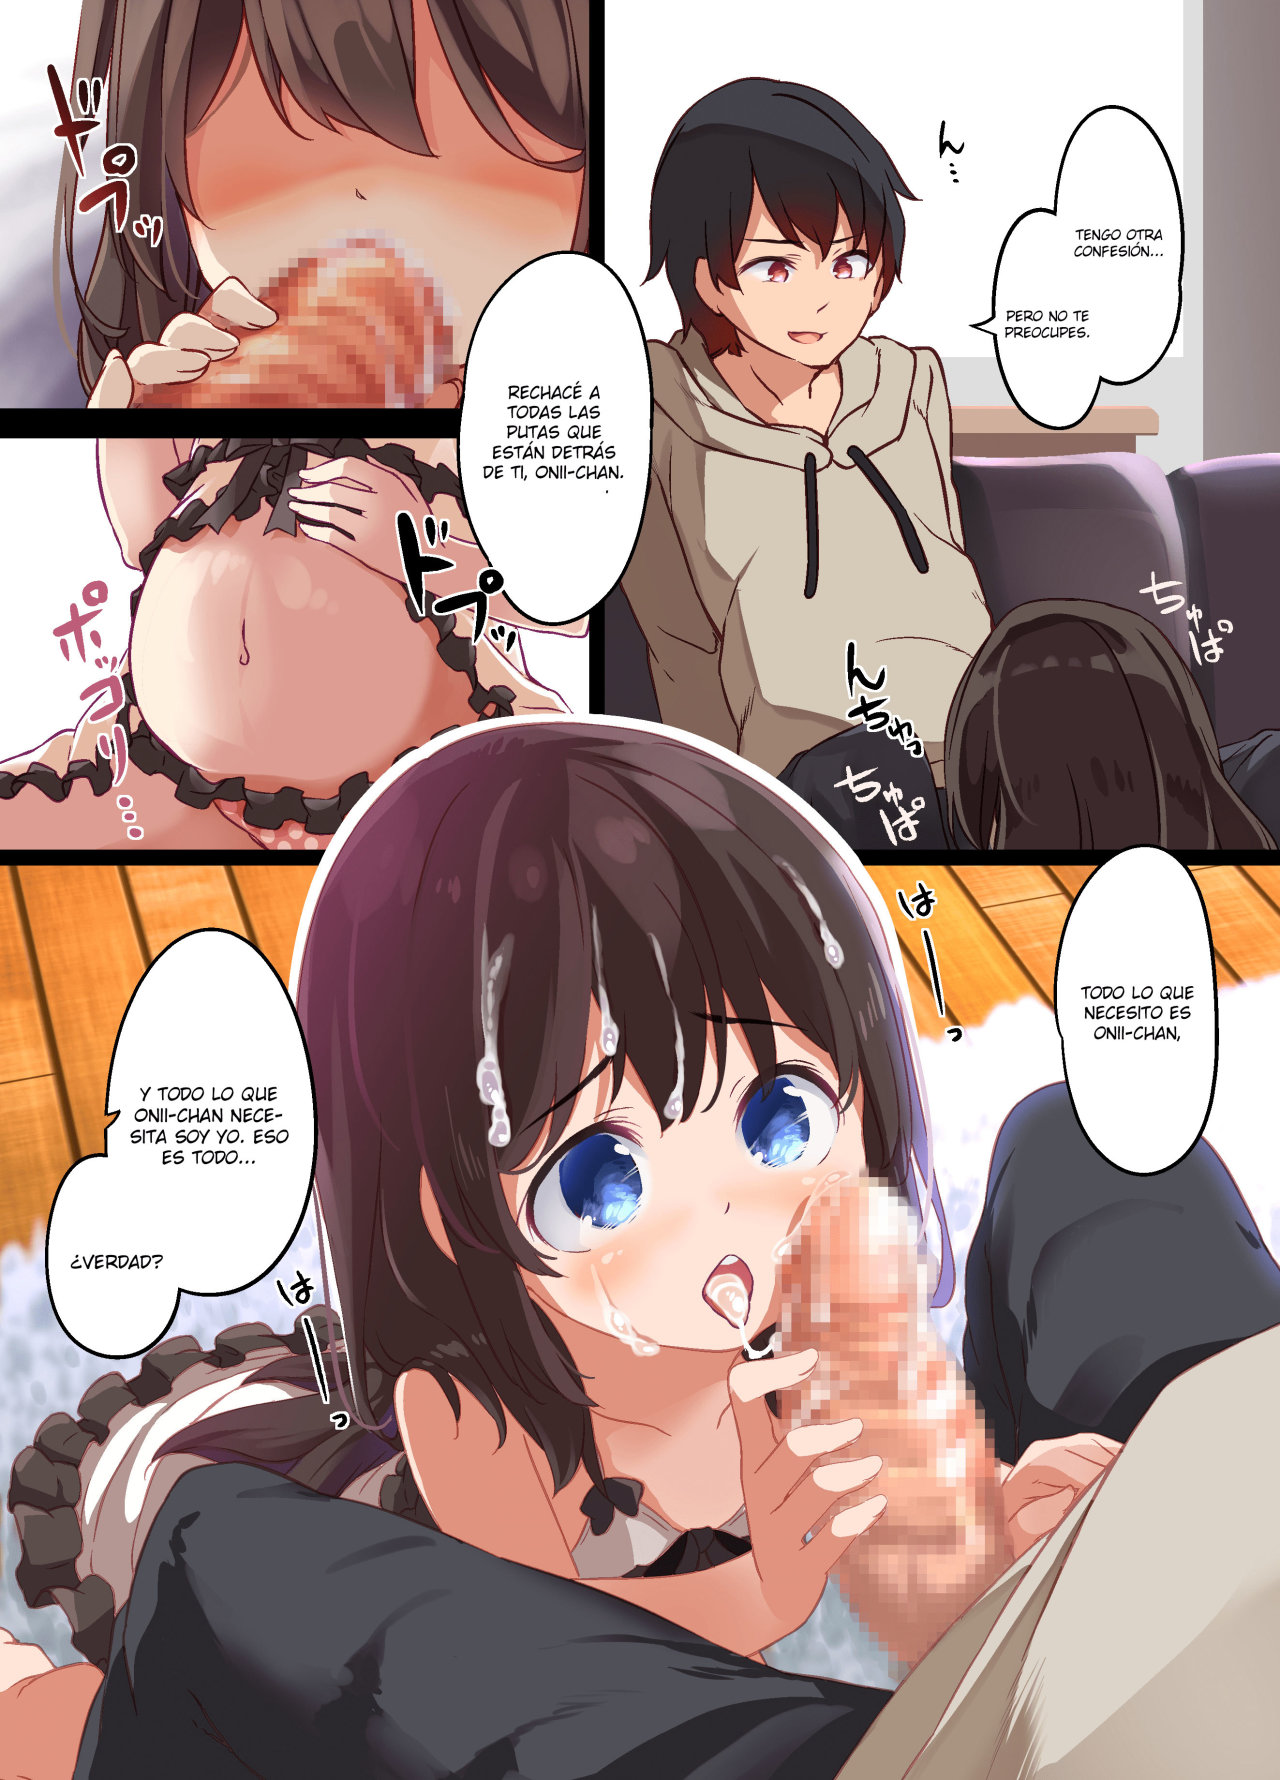 A Yandere Little Sister wants to be impregnated by her big brother - 34